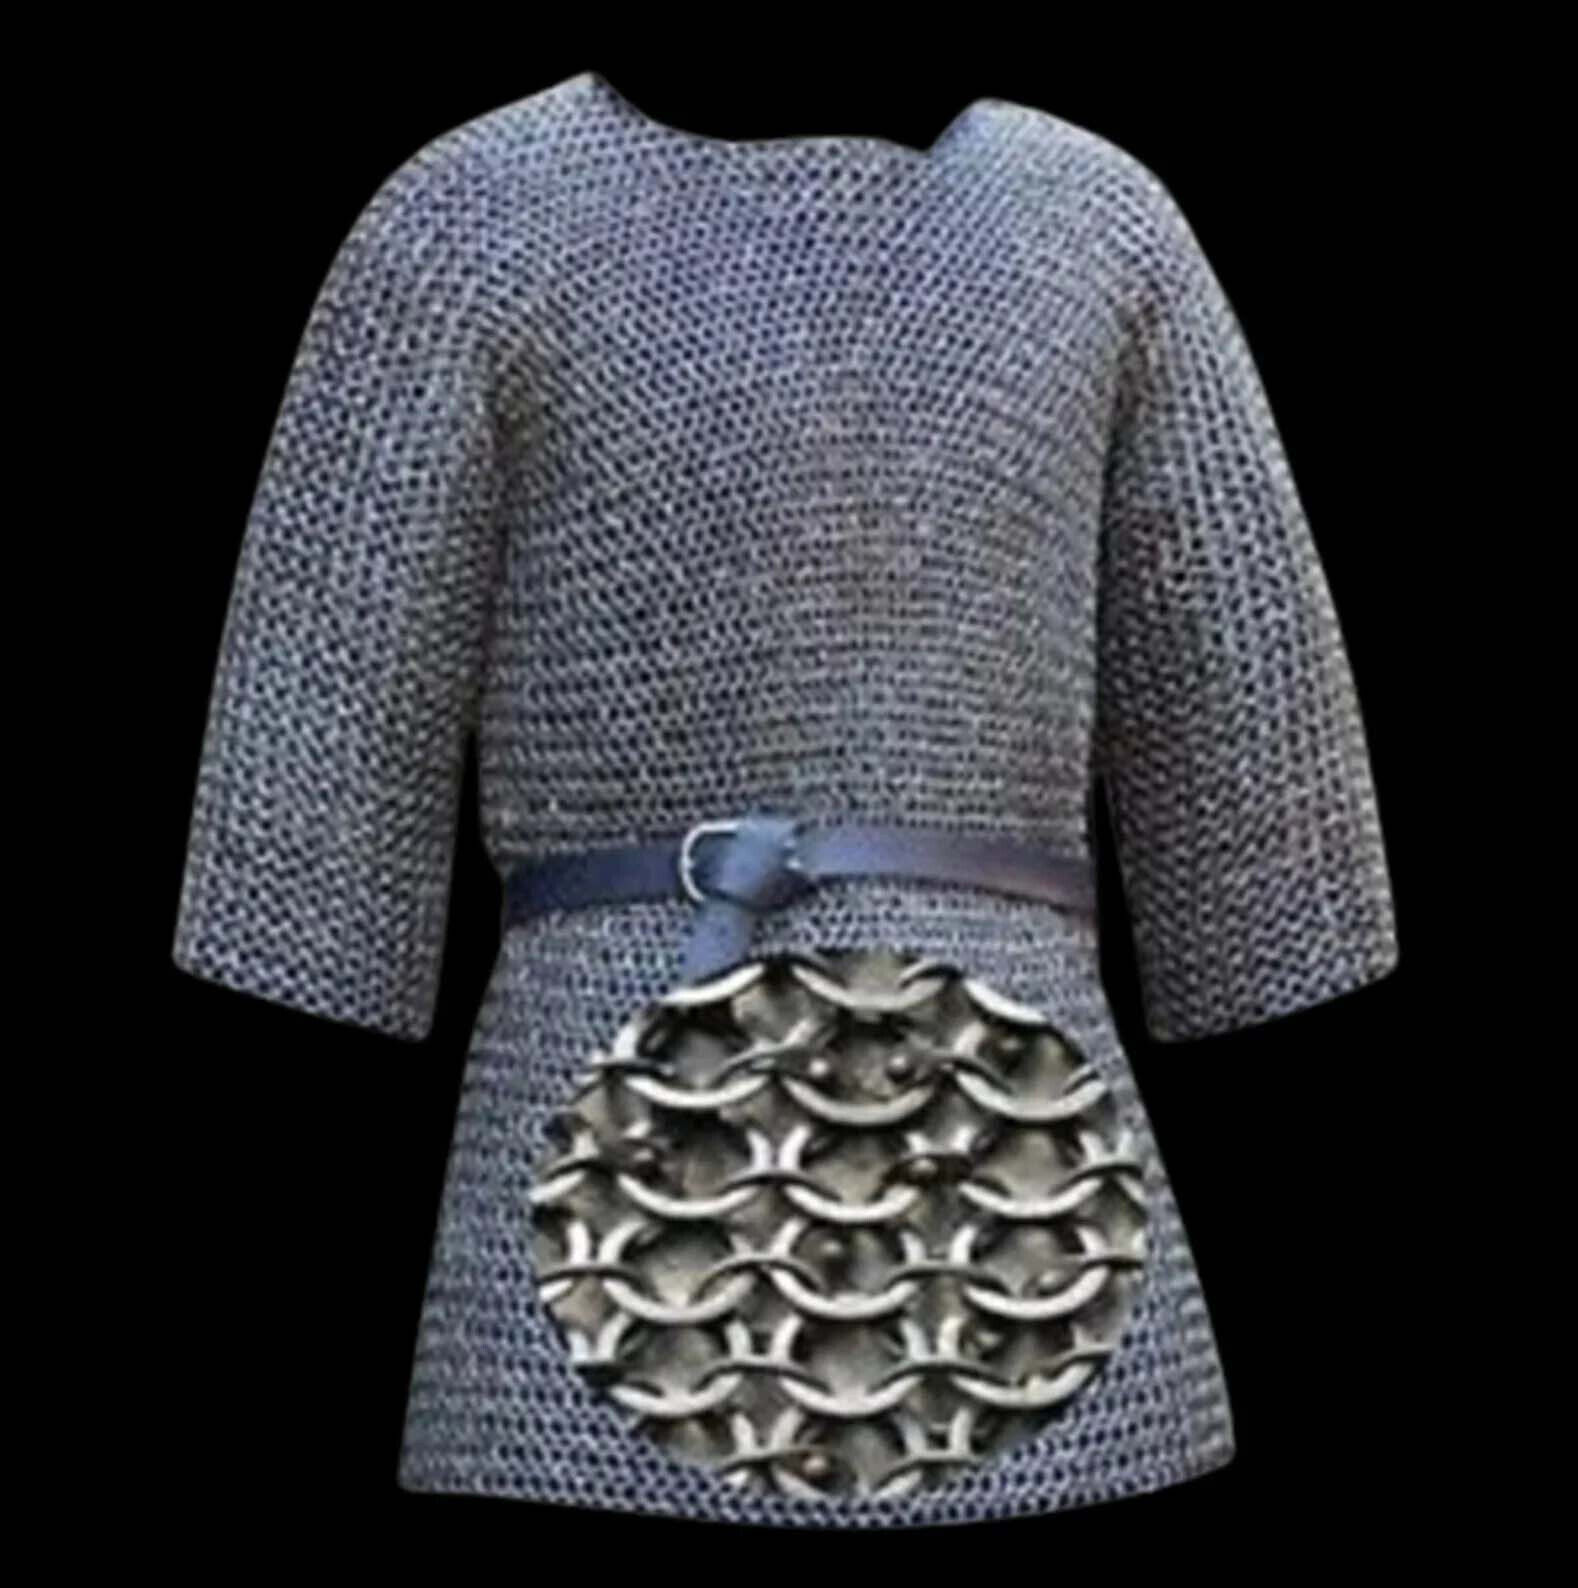 Handmade 6 mm chain mail shirt,Half Sleeve,Round Rivited with Soiled ring,mediev